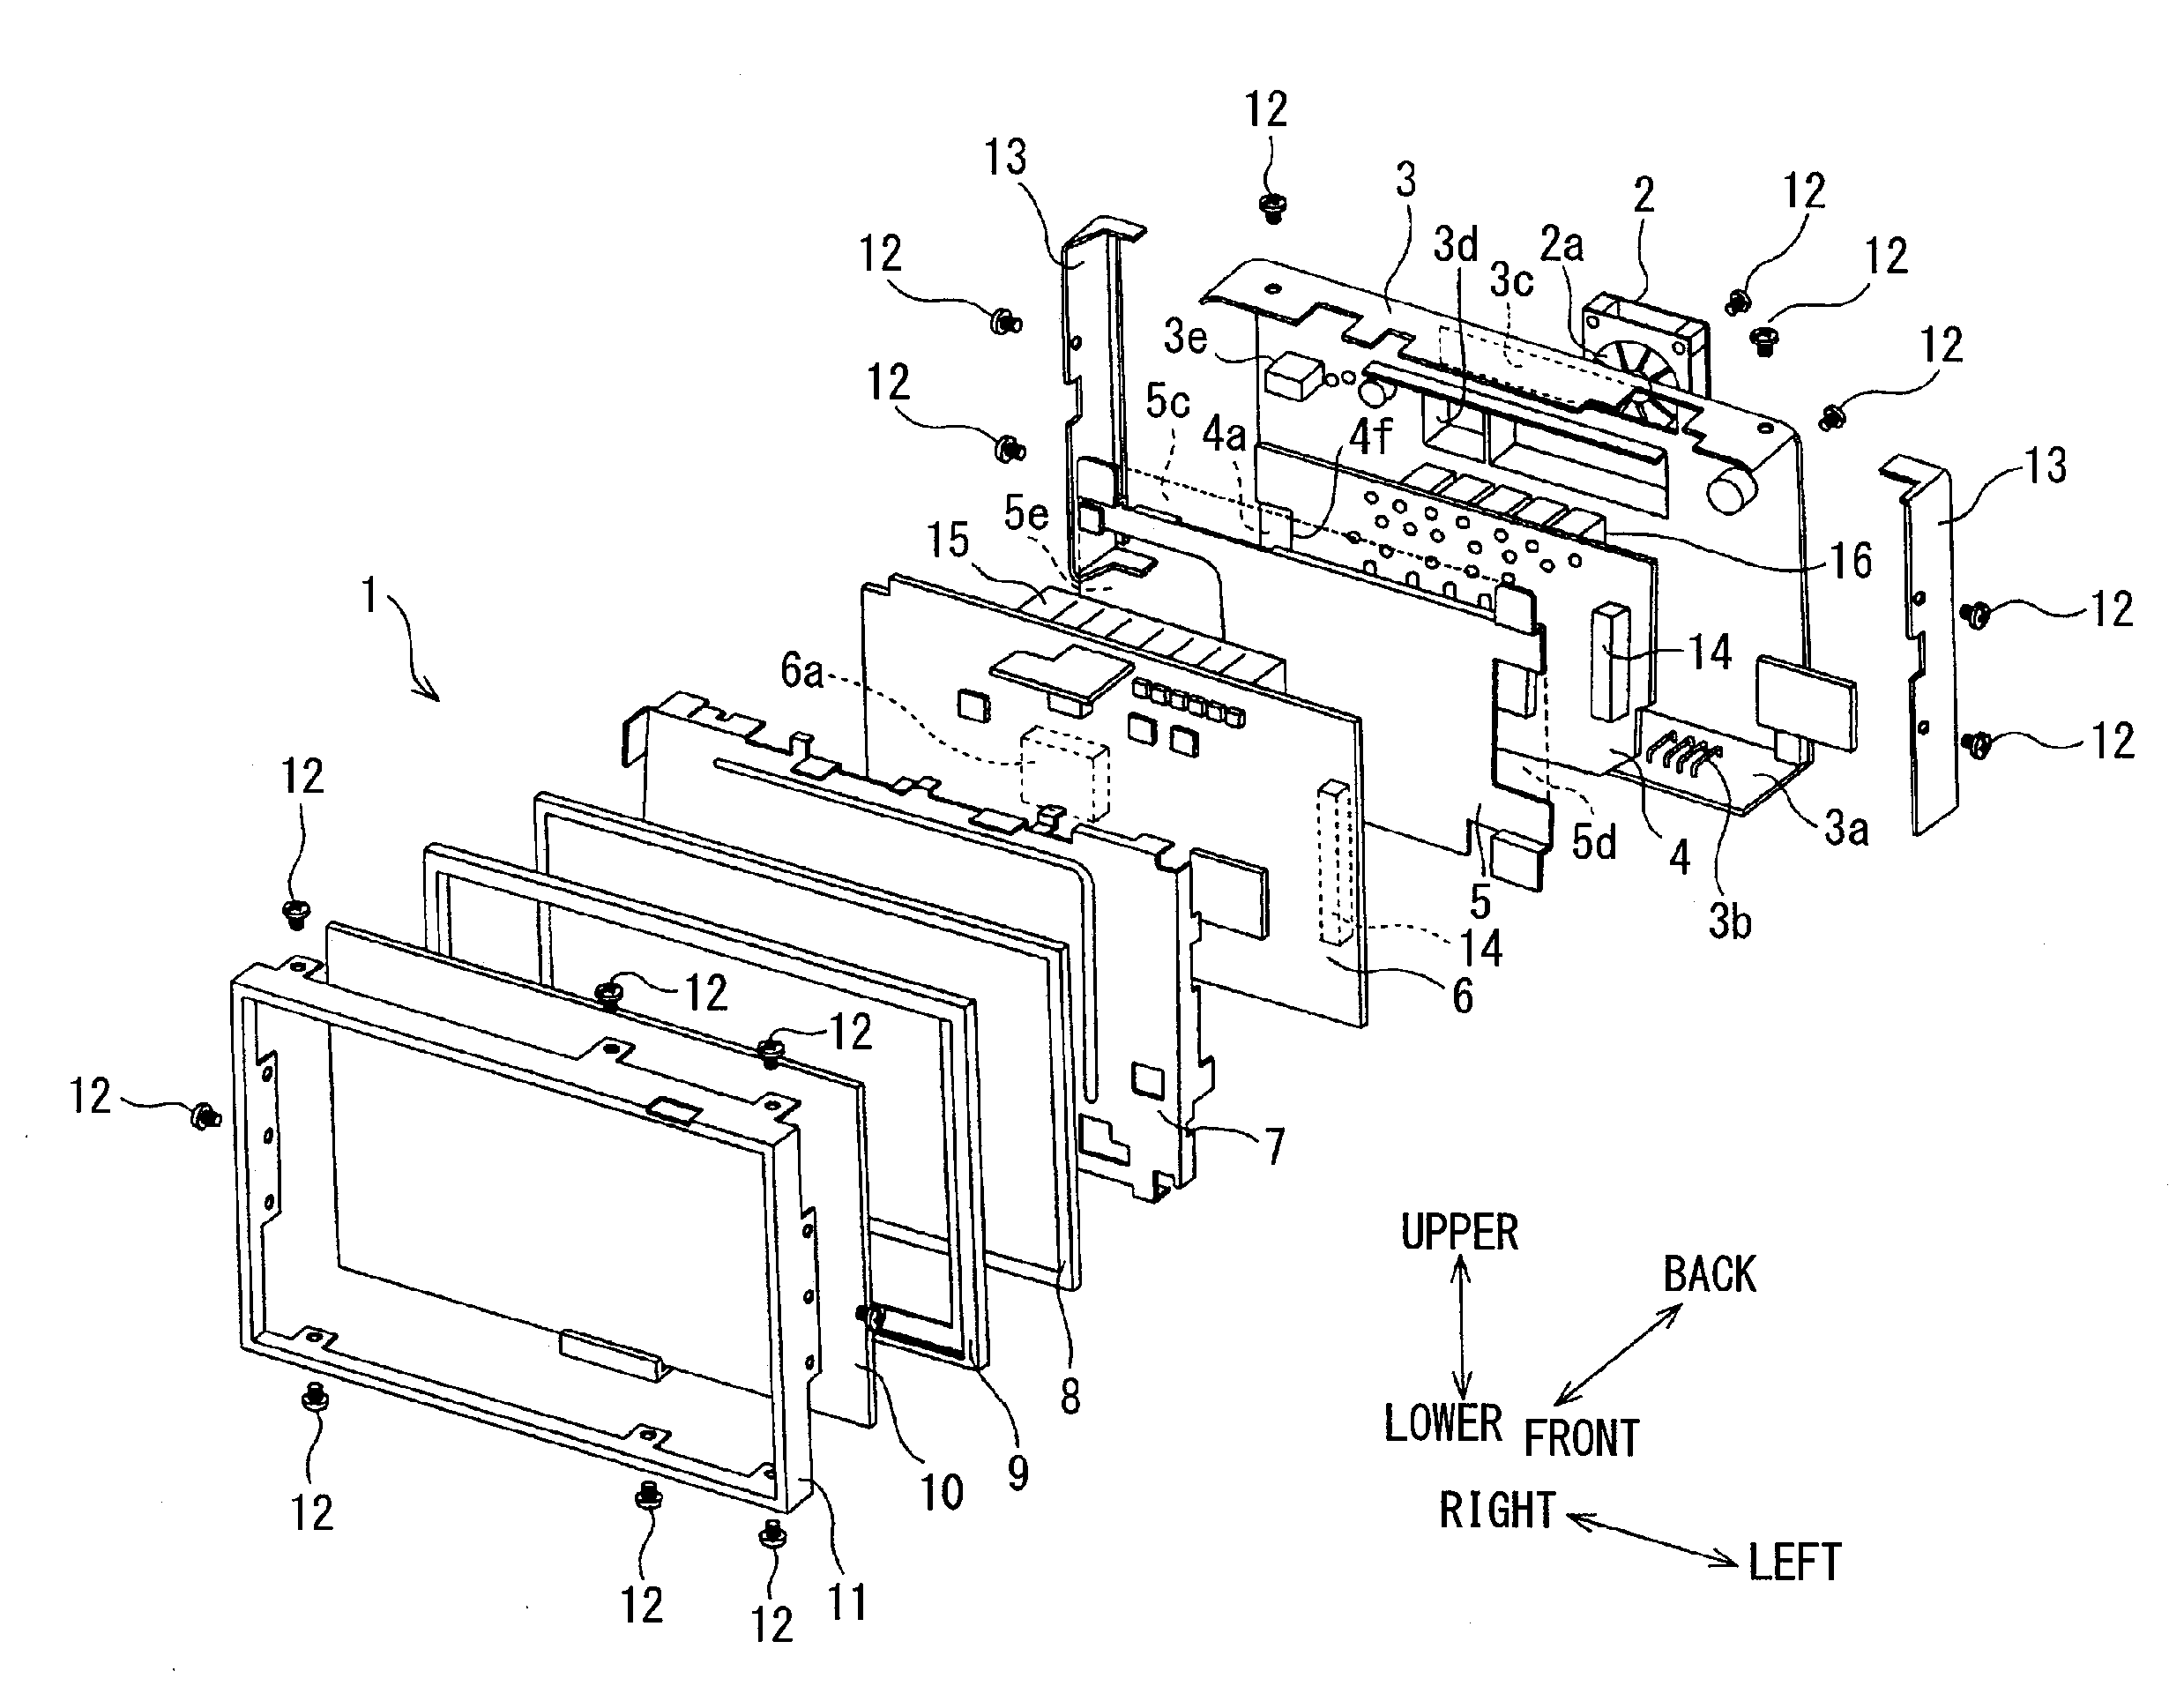 Electronic device for vehicle